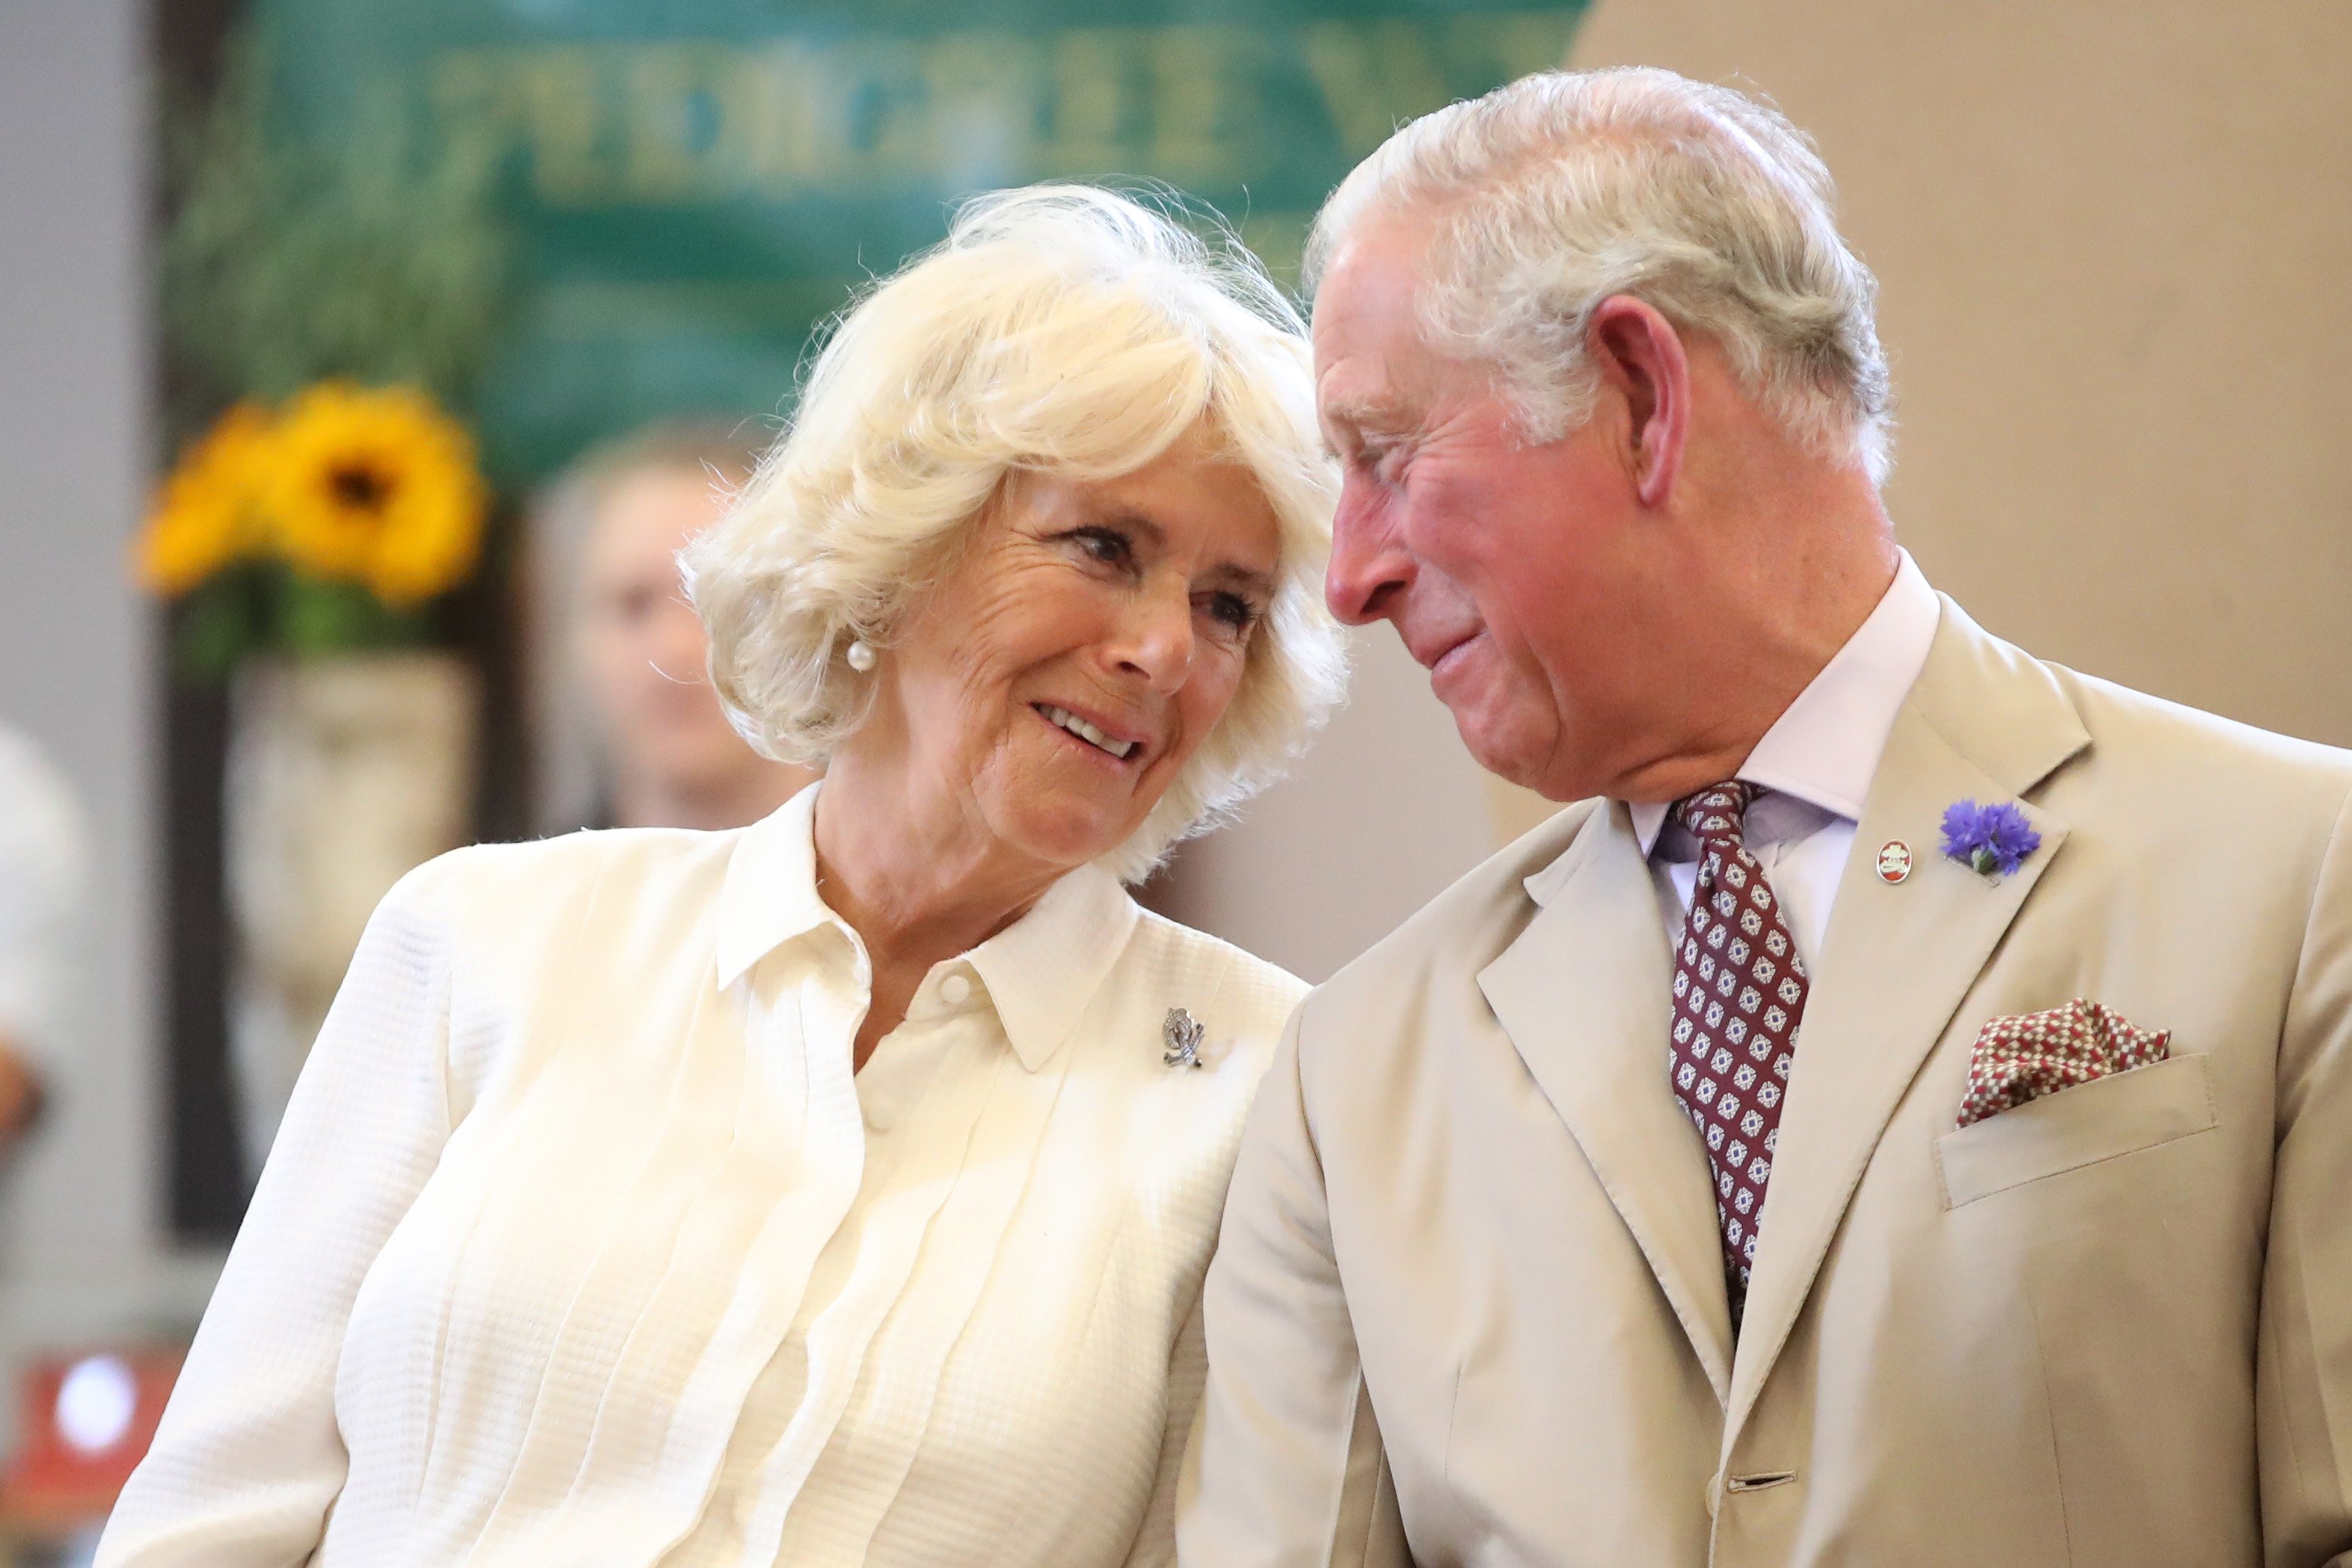 Prince Charles and Camilla look at each other as they reopen the newly-renovated Edwardian community hall, The Strand Hall, during their third day visiting Wales on July 4, 2018, in Builth Wells, Wales. | Source: Getty Images